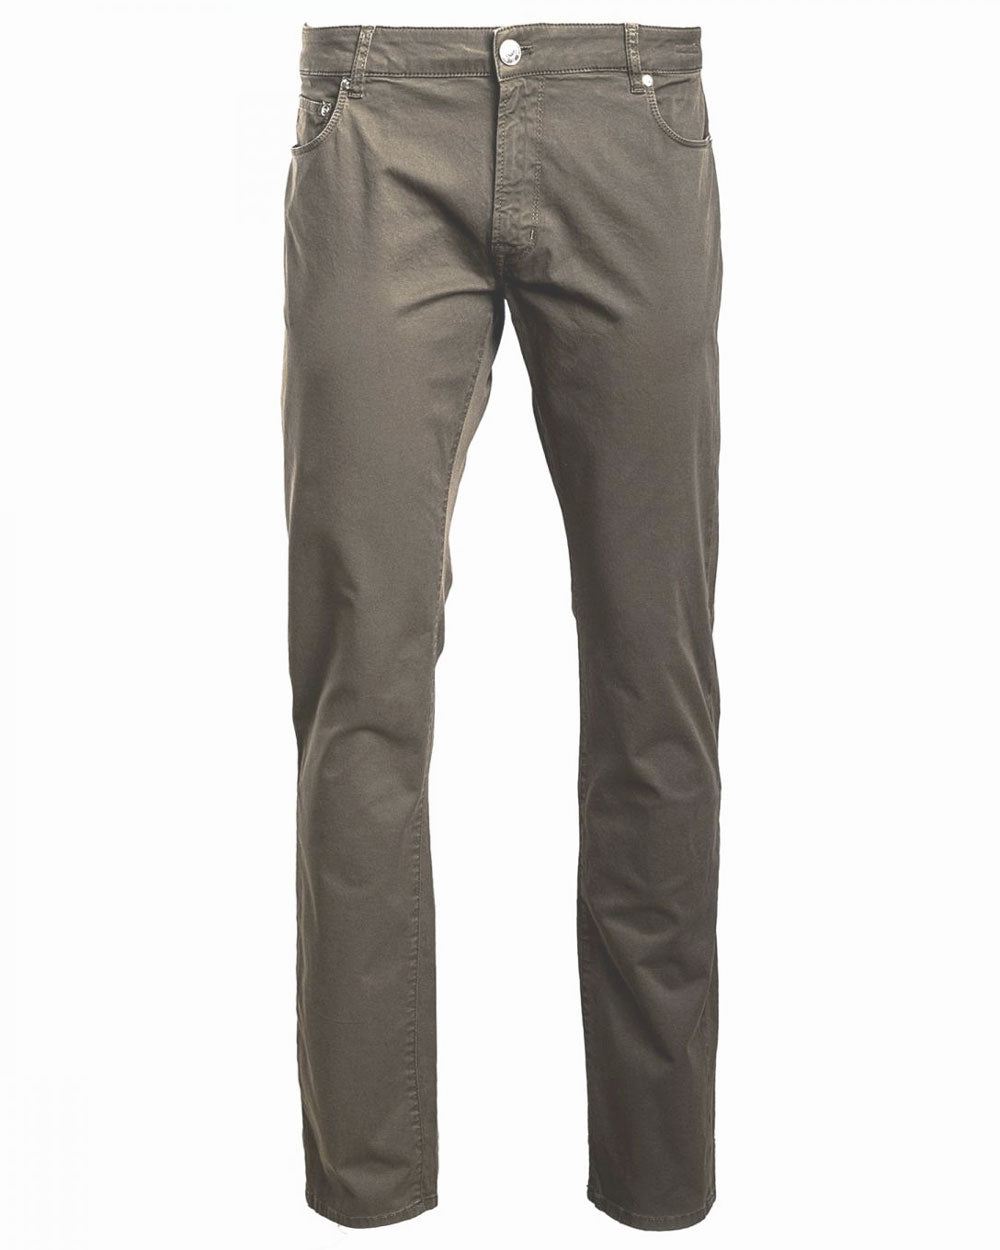 5 Pocked Cotton Pant in Washed Taupe